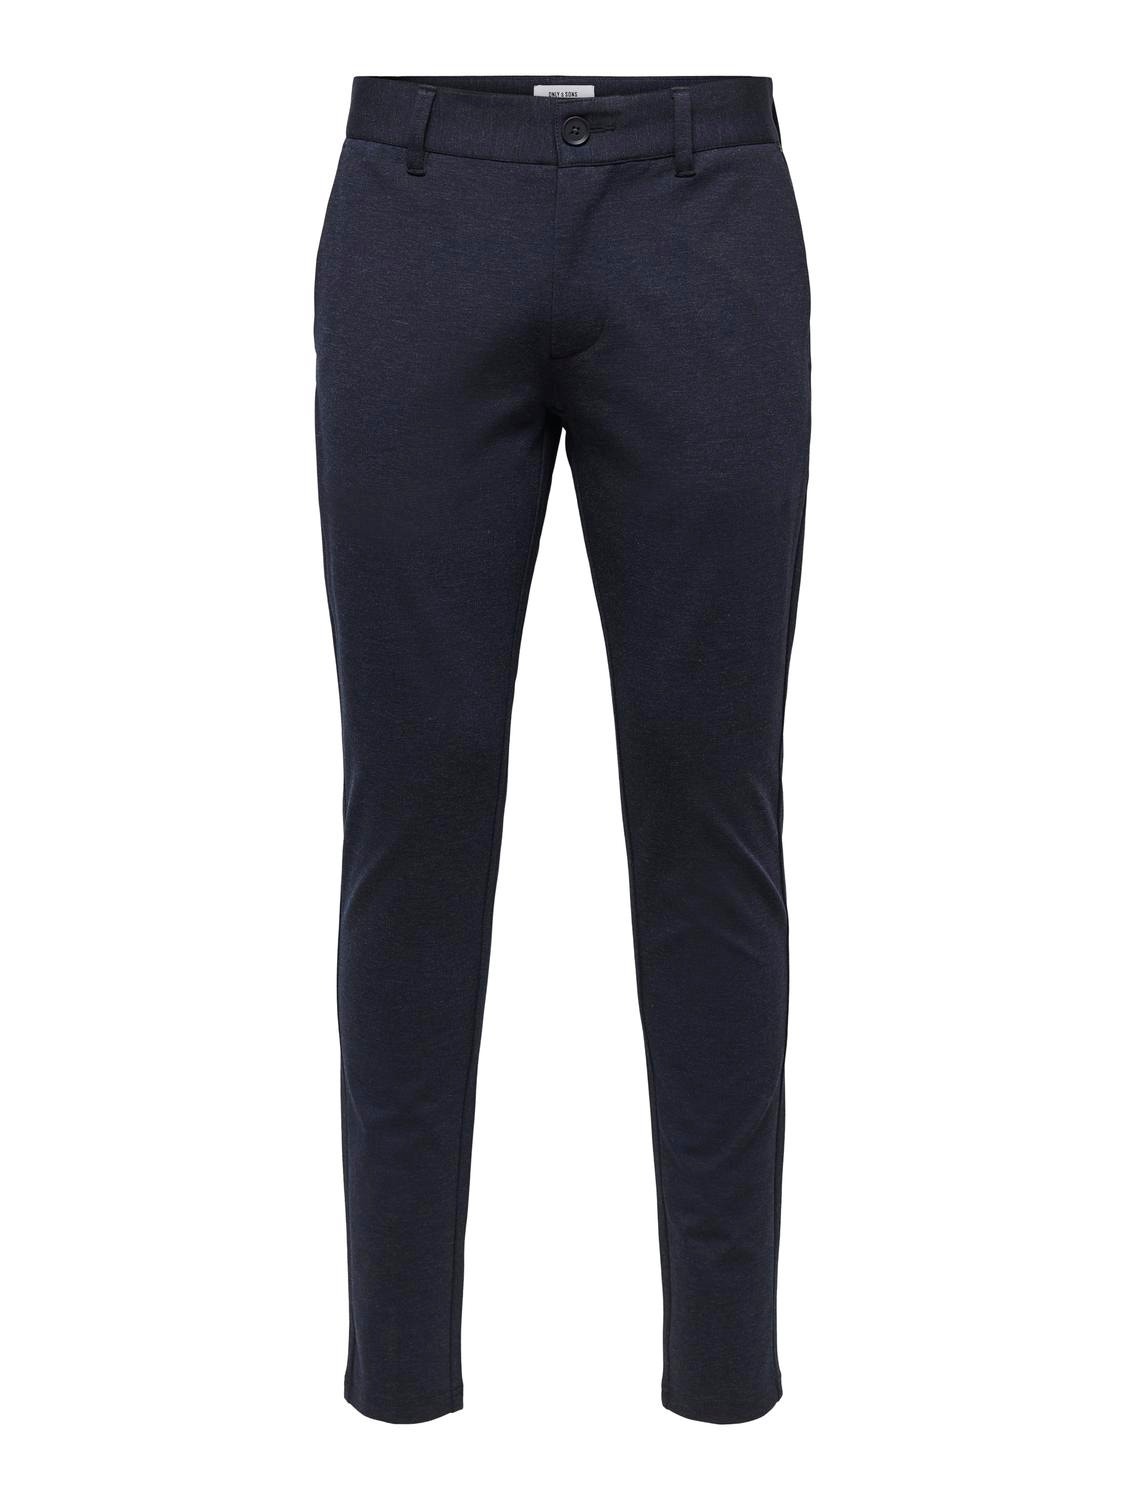 ONLY & SONS Slim Tapered Fit Mid waist Trousers -Dress Blues - 22026326